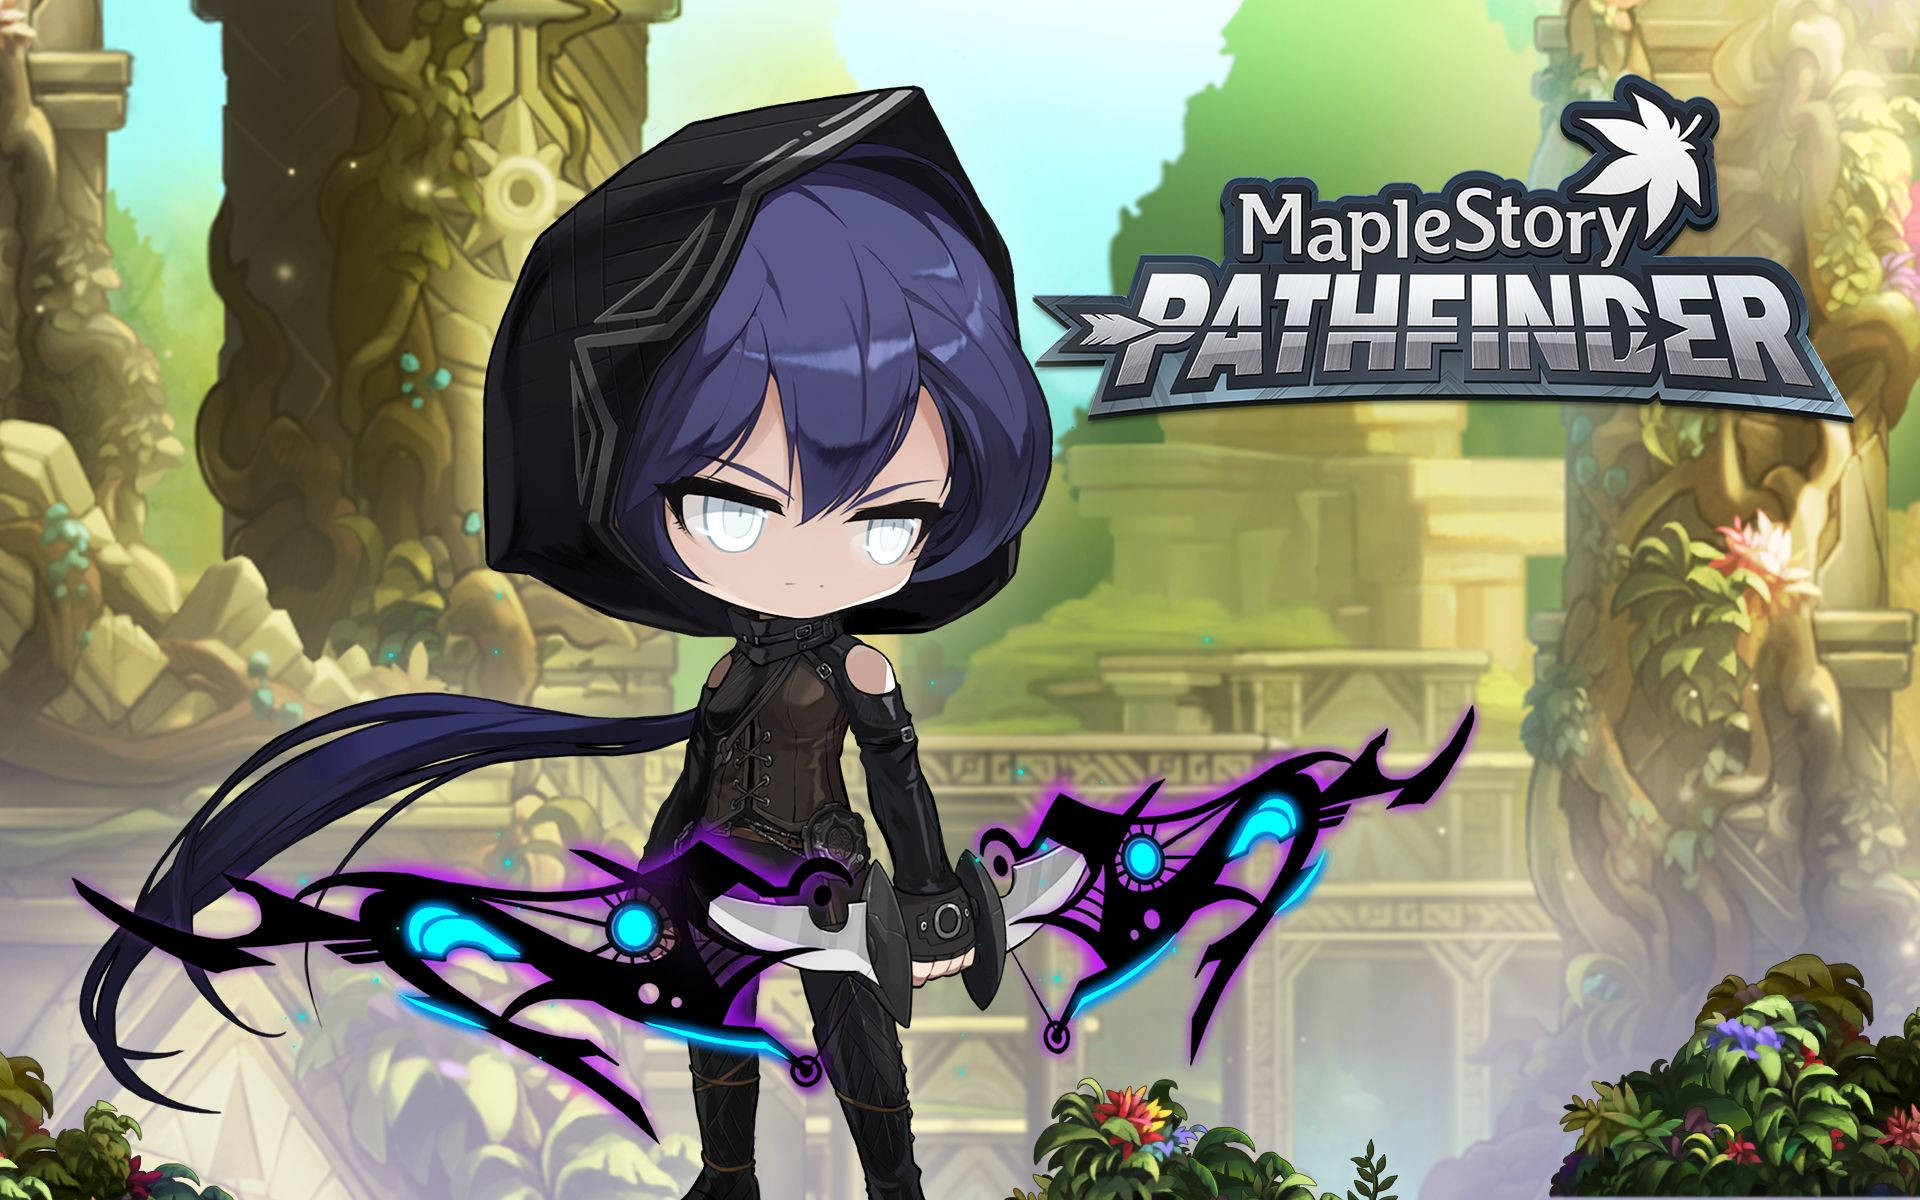 Unlock your potential in MapleStory 2, the thrilling adventure MMORPG. Wallpaper